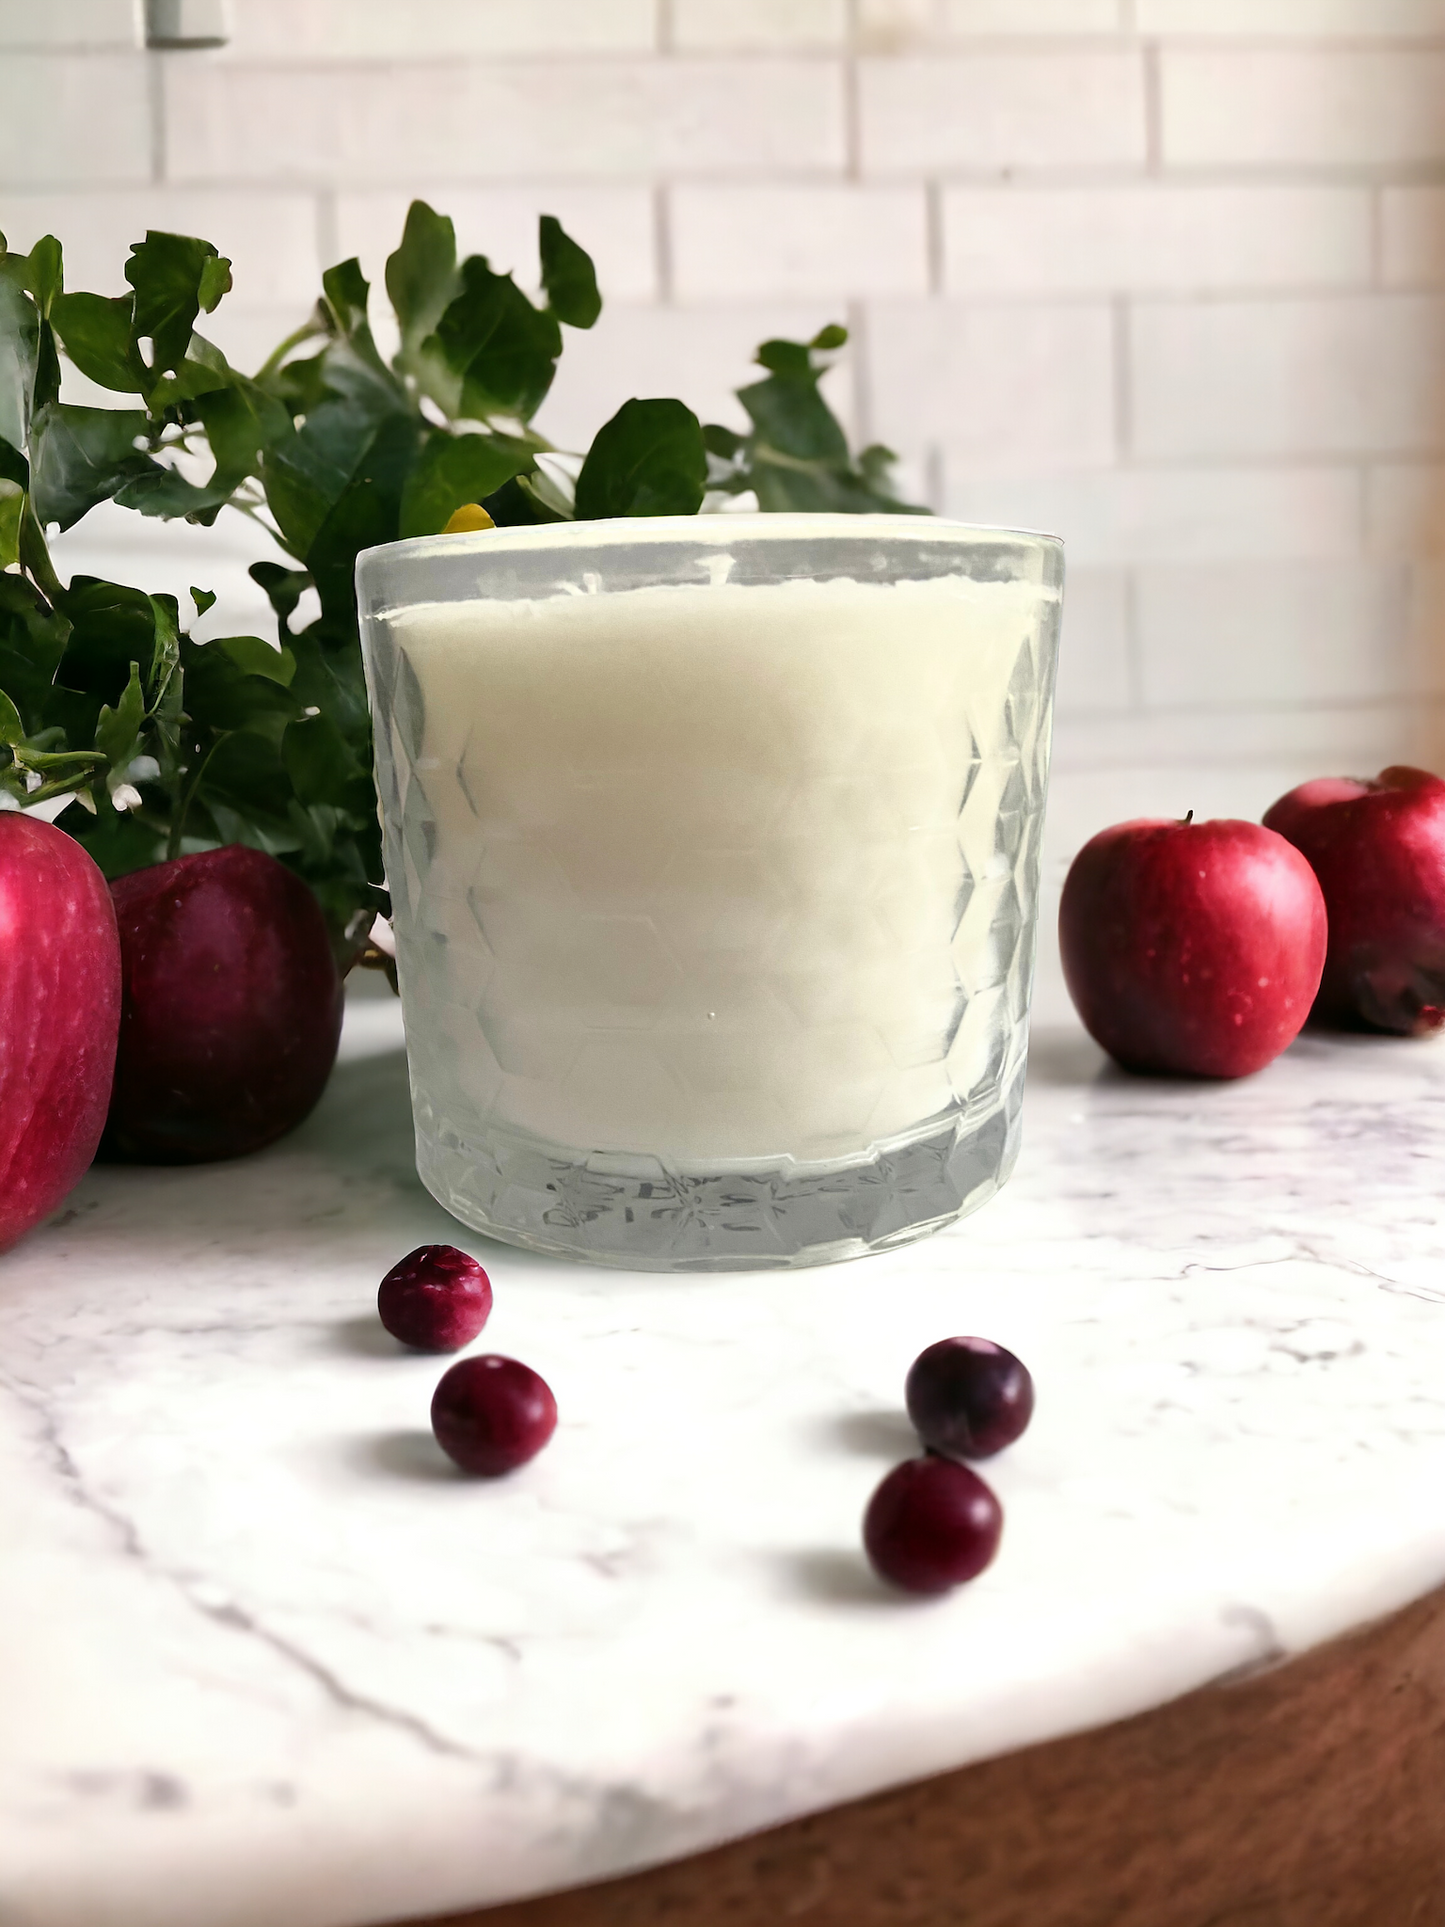 Indulge in the warm and inviting fragrance of our Cranberry Apple 3 wick scented candle. The perfect addition to your cozy evening ritual, this candle creates a cozy ambiance while filling your home with the delicious scent of cranberries and crisp juicy red apples. Made with 3 wicks for even burning and long lasting enjoyment.